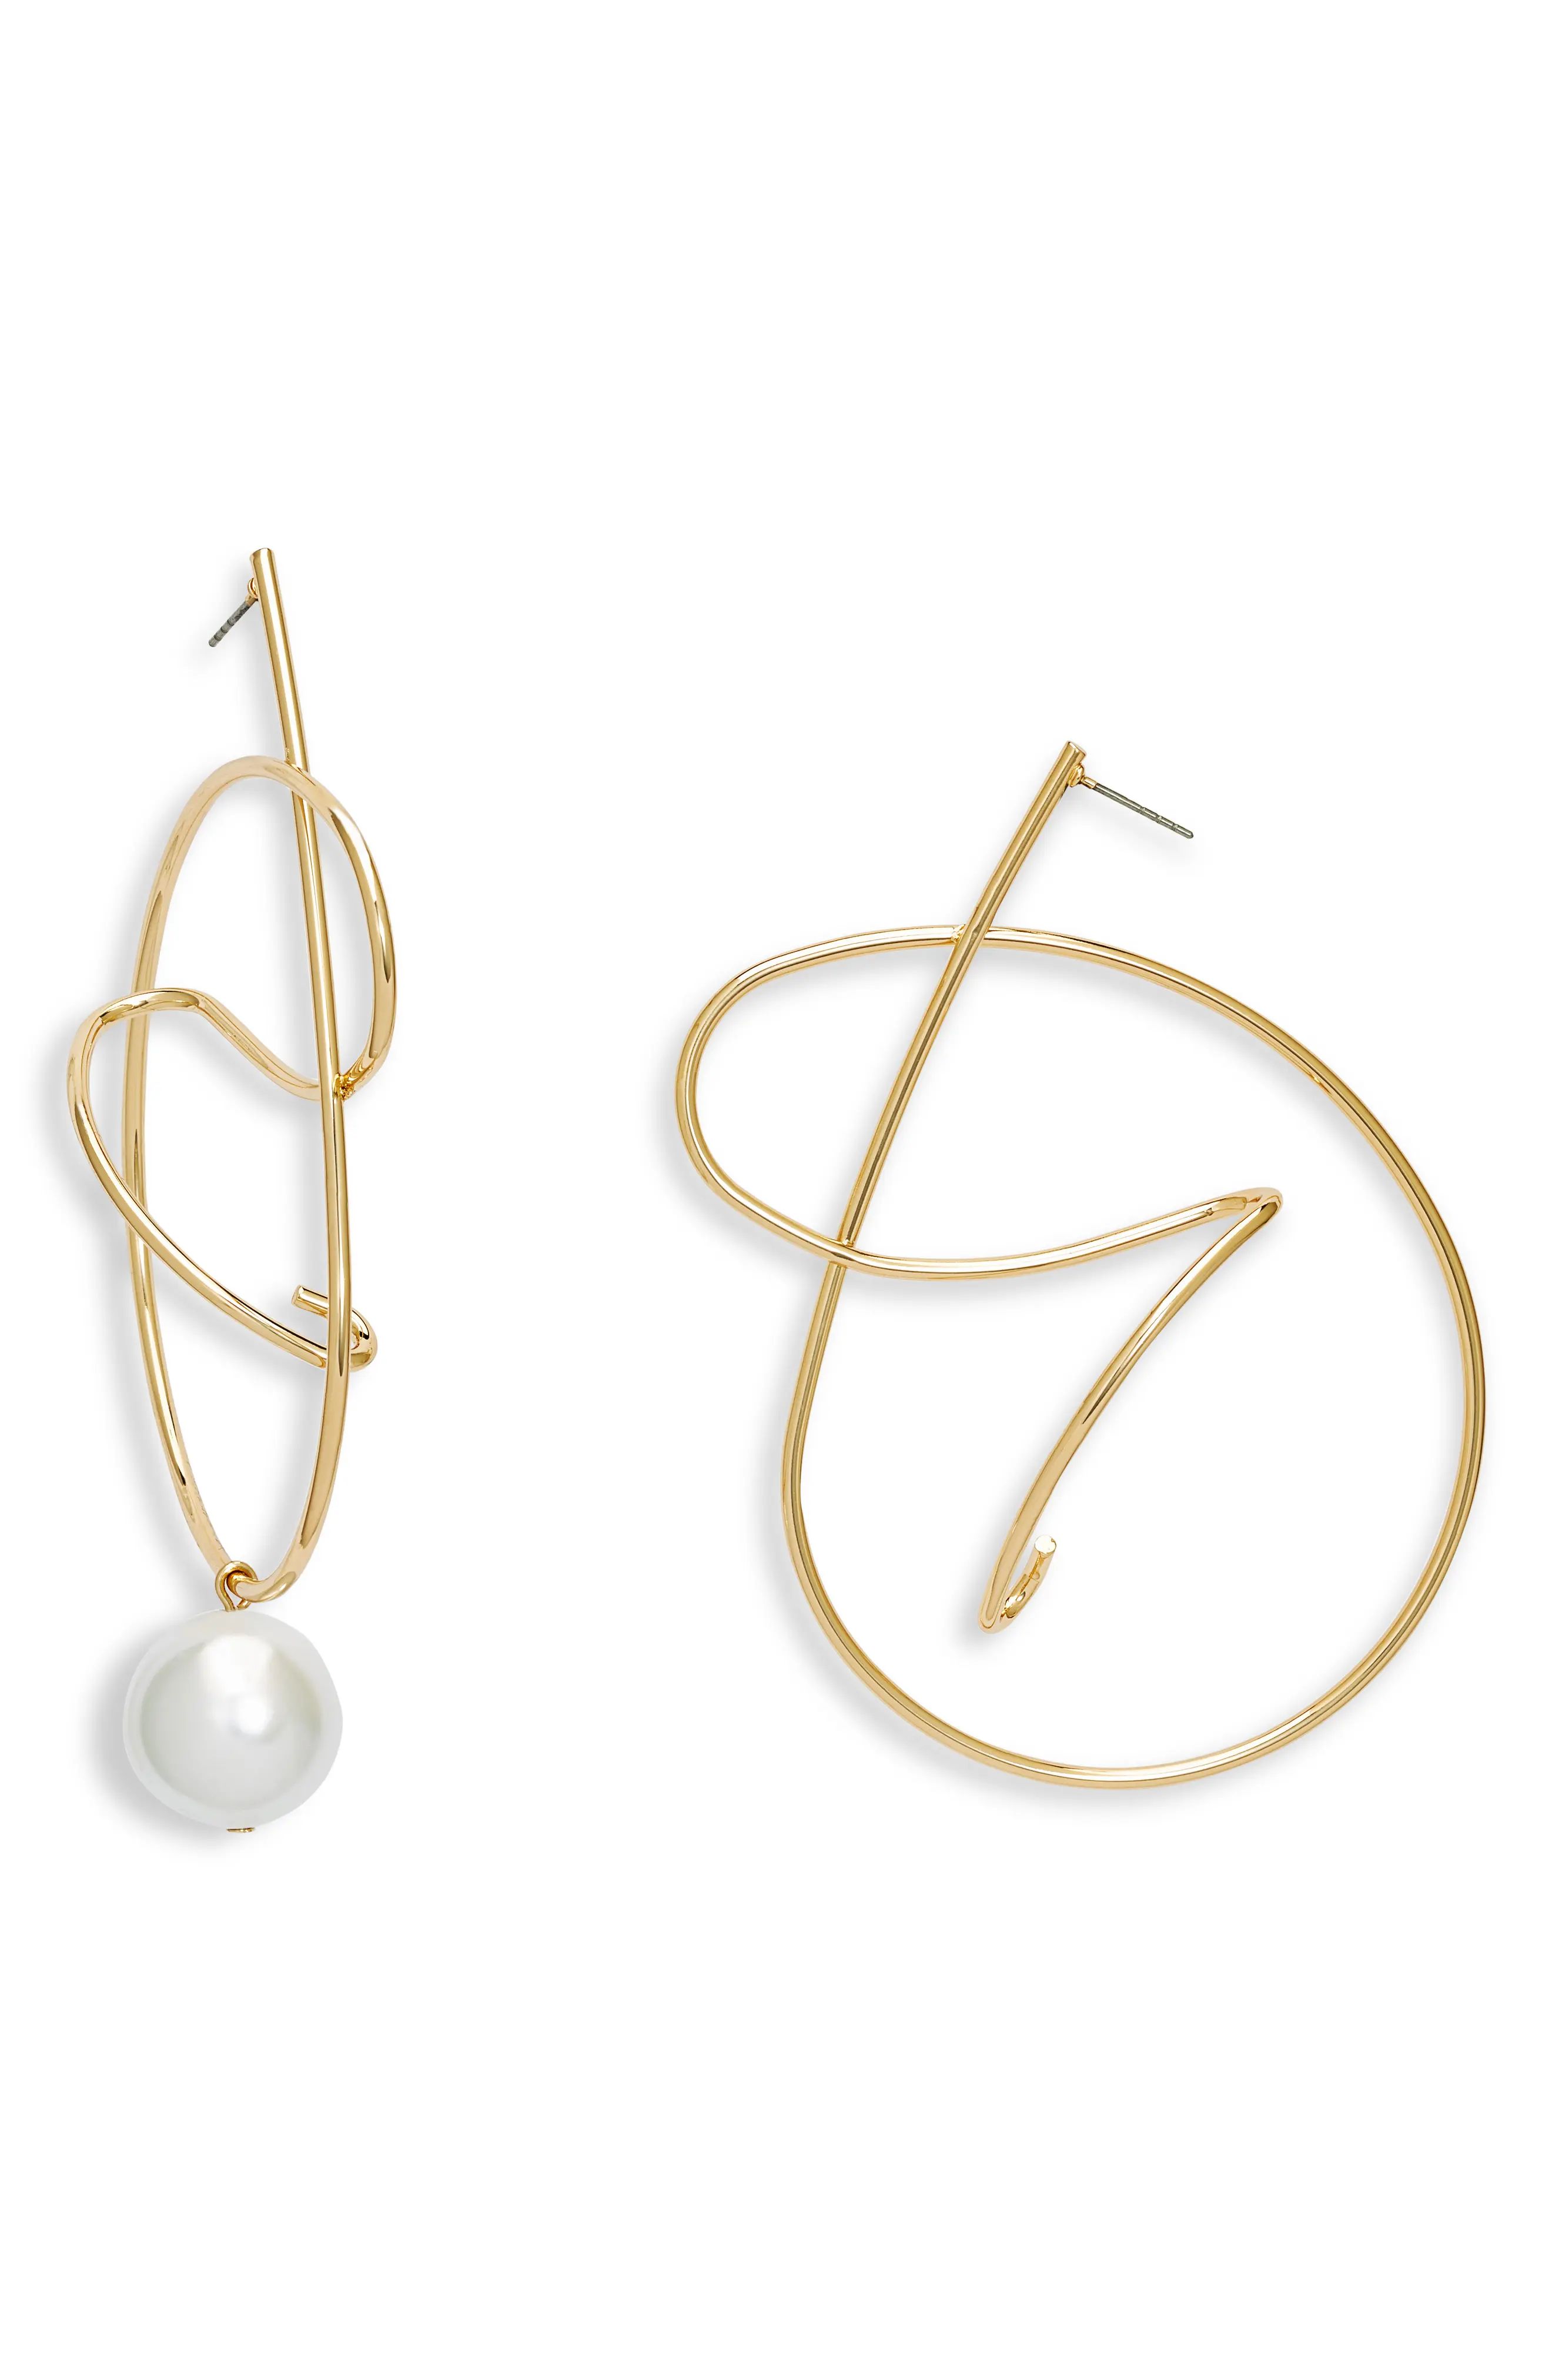 Open Edit Asymmetric Mismatched Imitation Pearl Statement Earrings in White- Gold at Nordstrom | Nordstrom